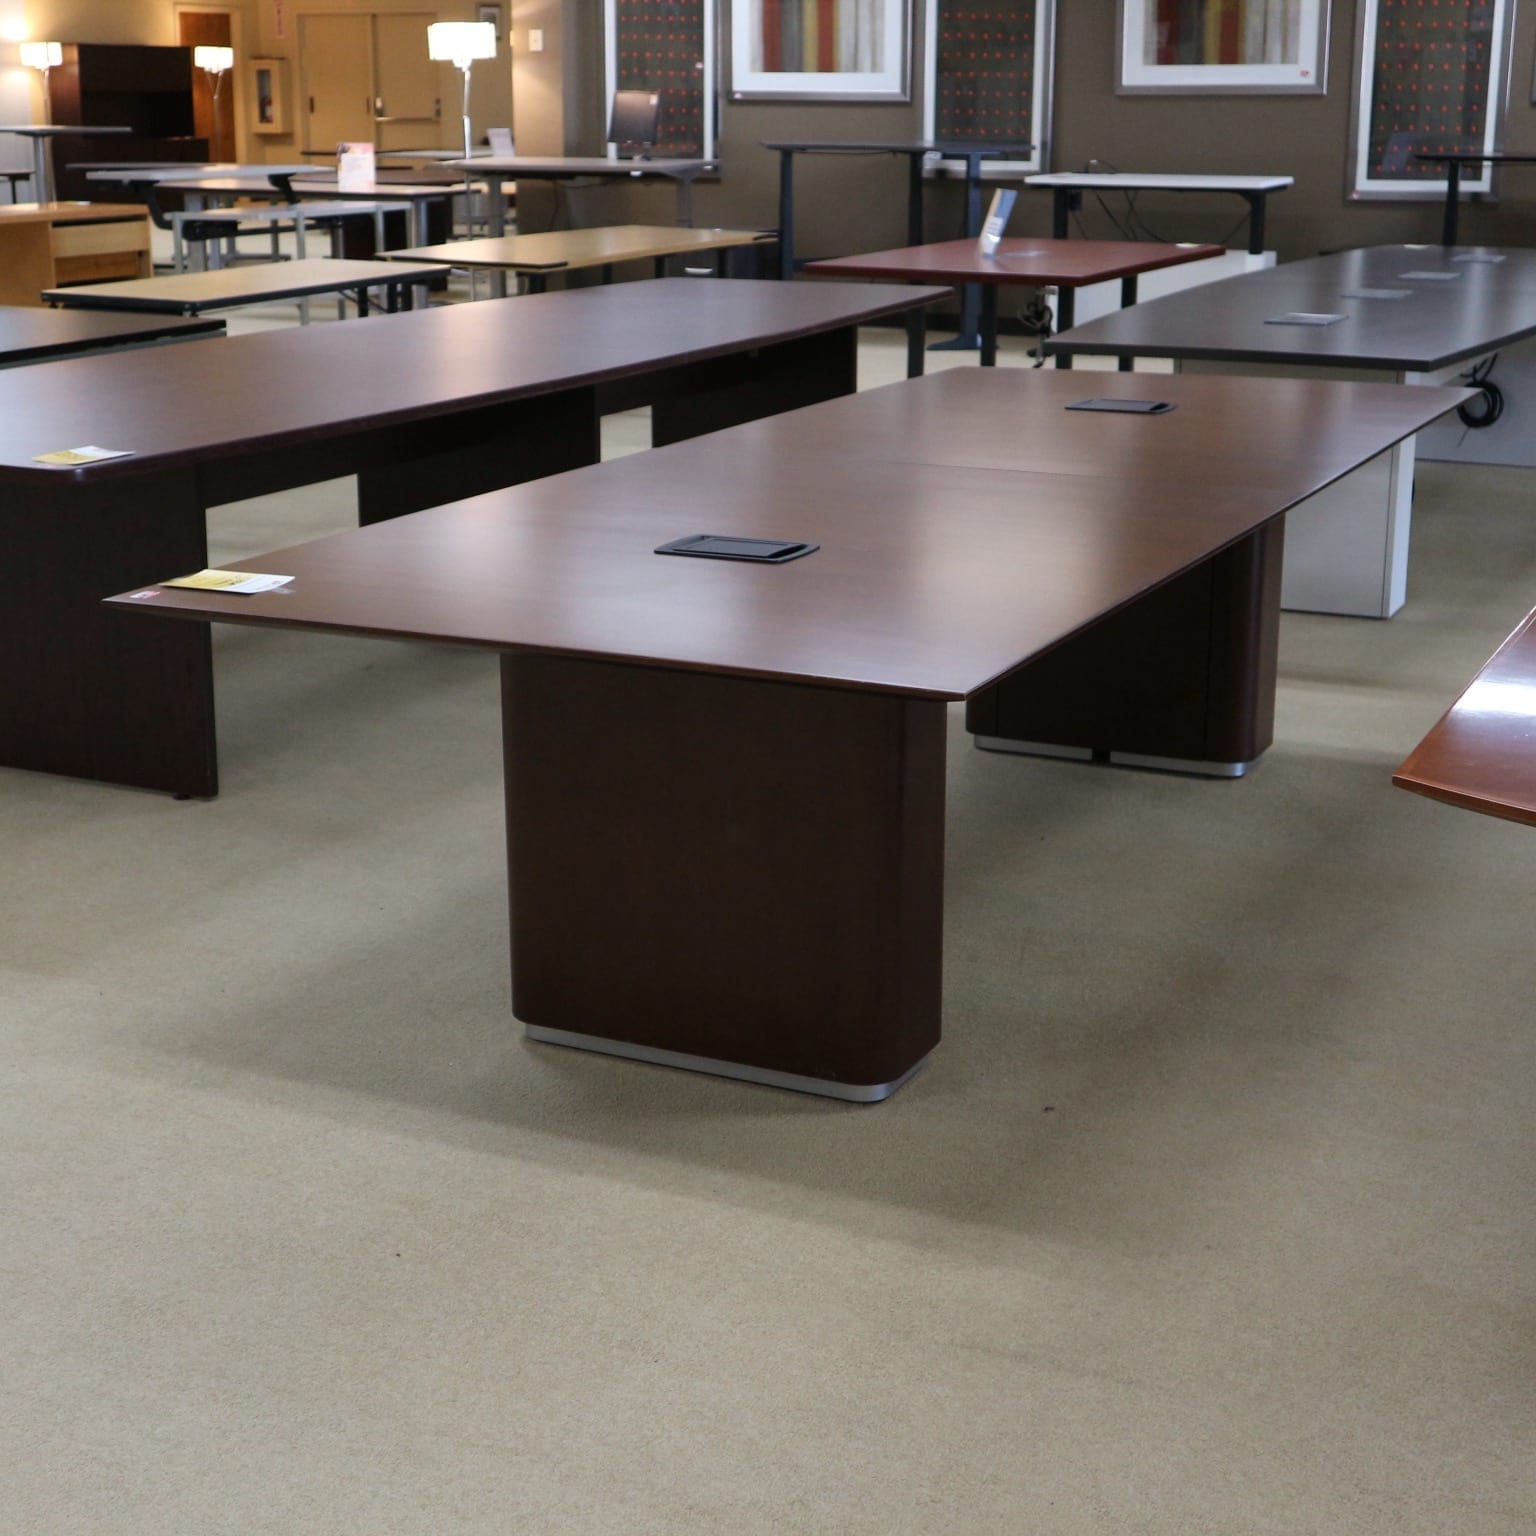 10 conference table